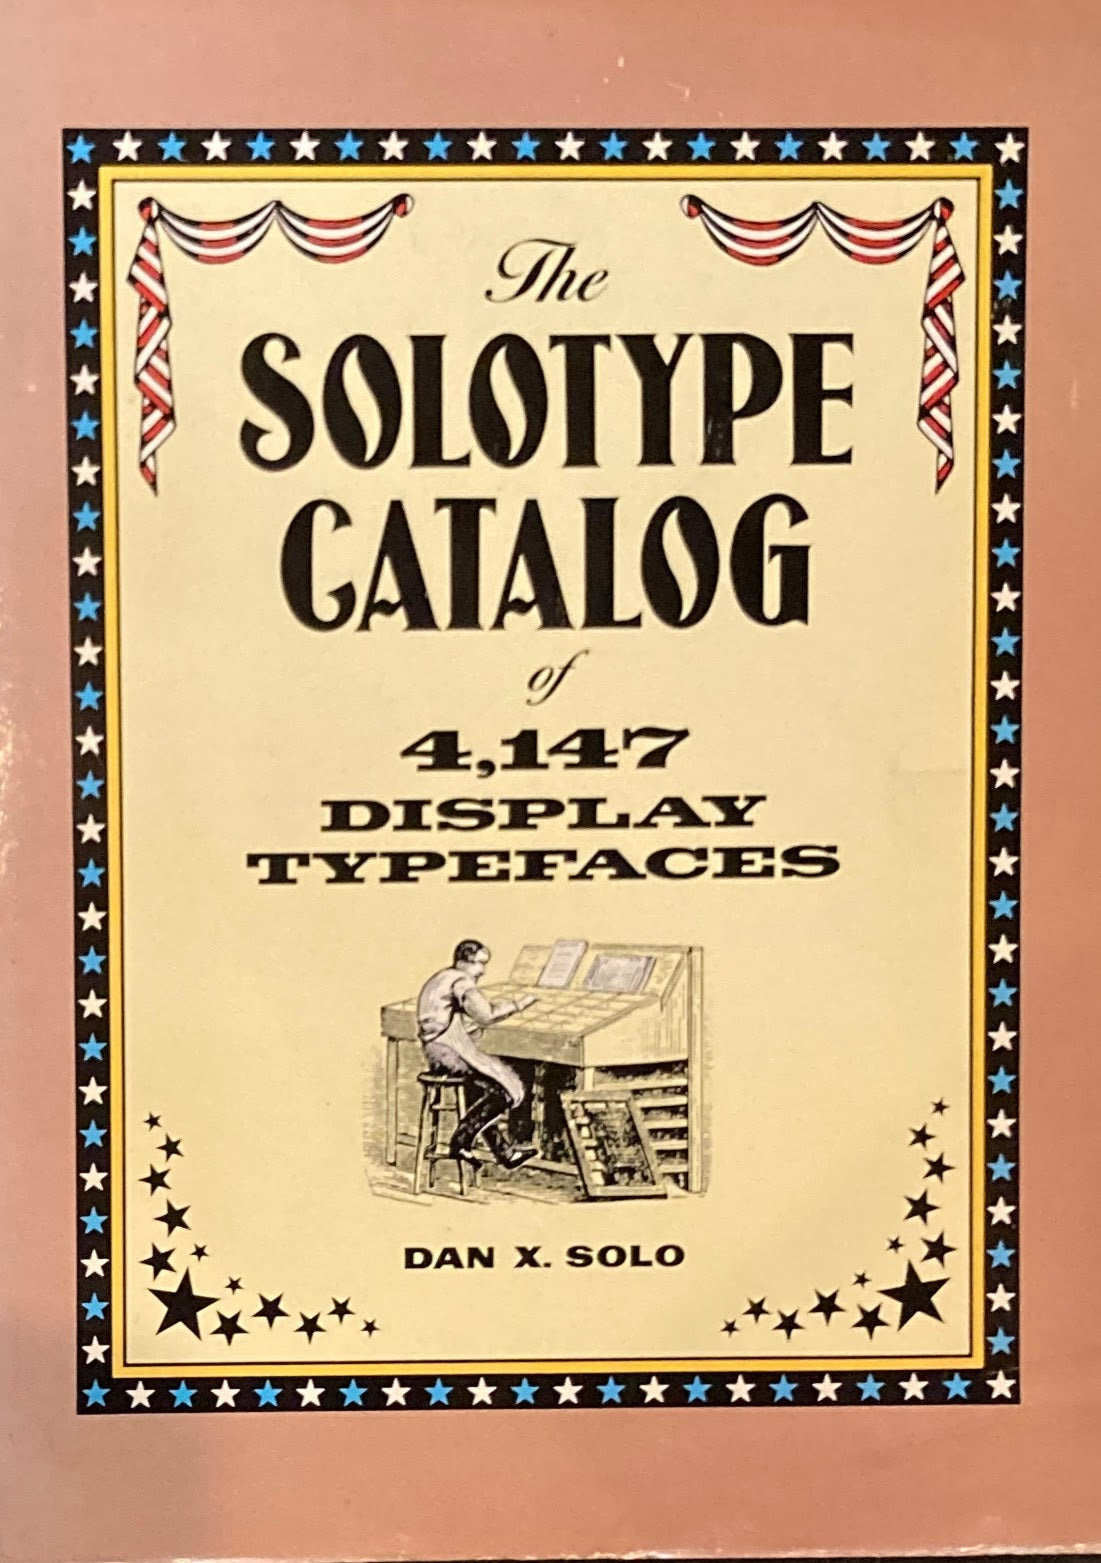 The Solotype Catalog of 4,147 Display Typefaces 　Dover